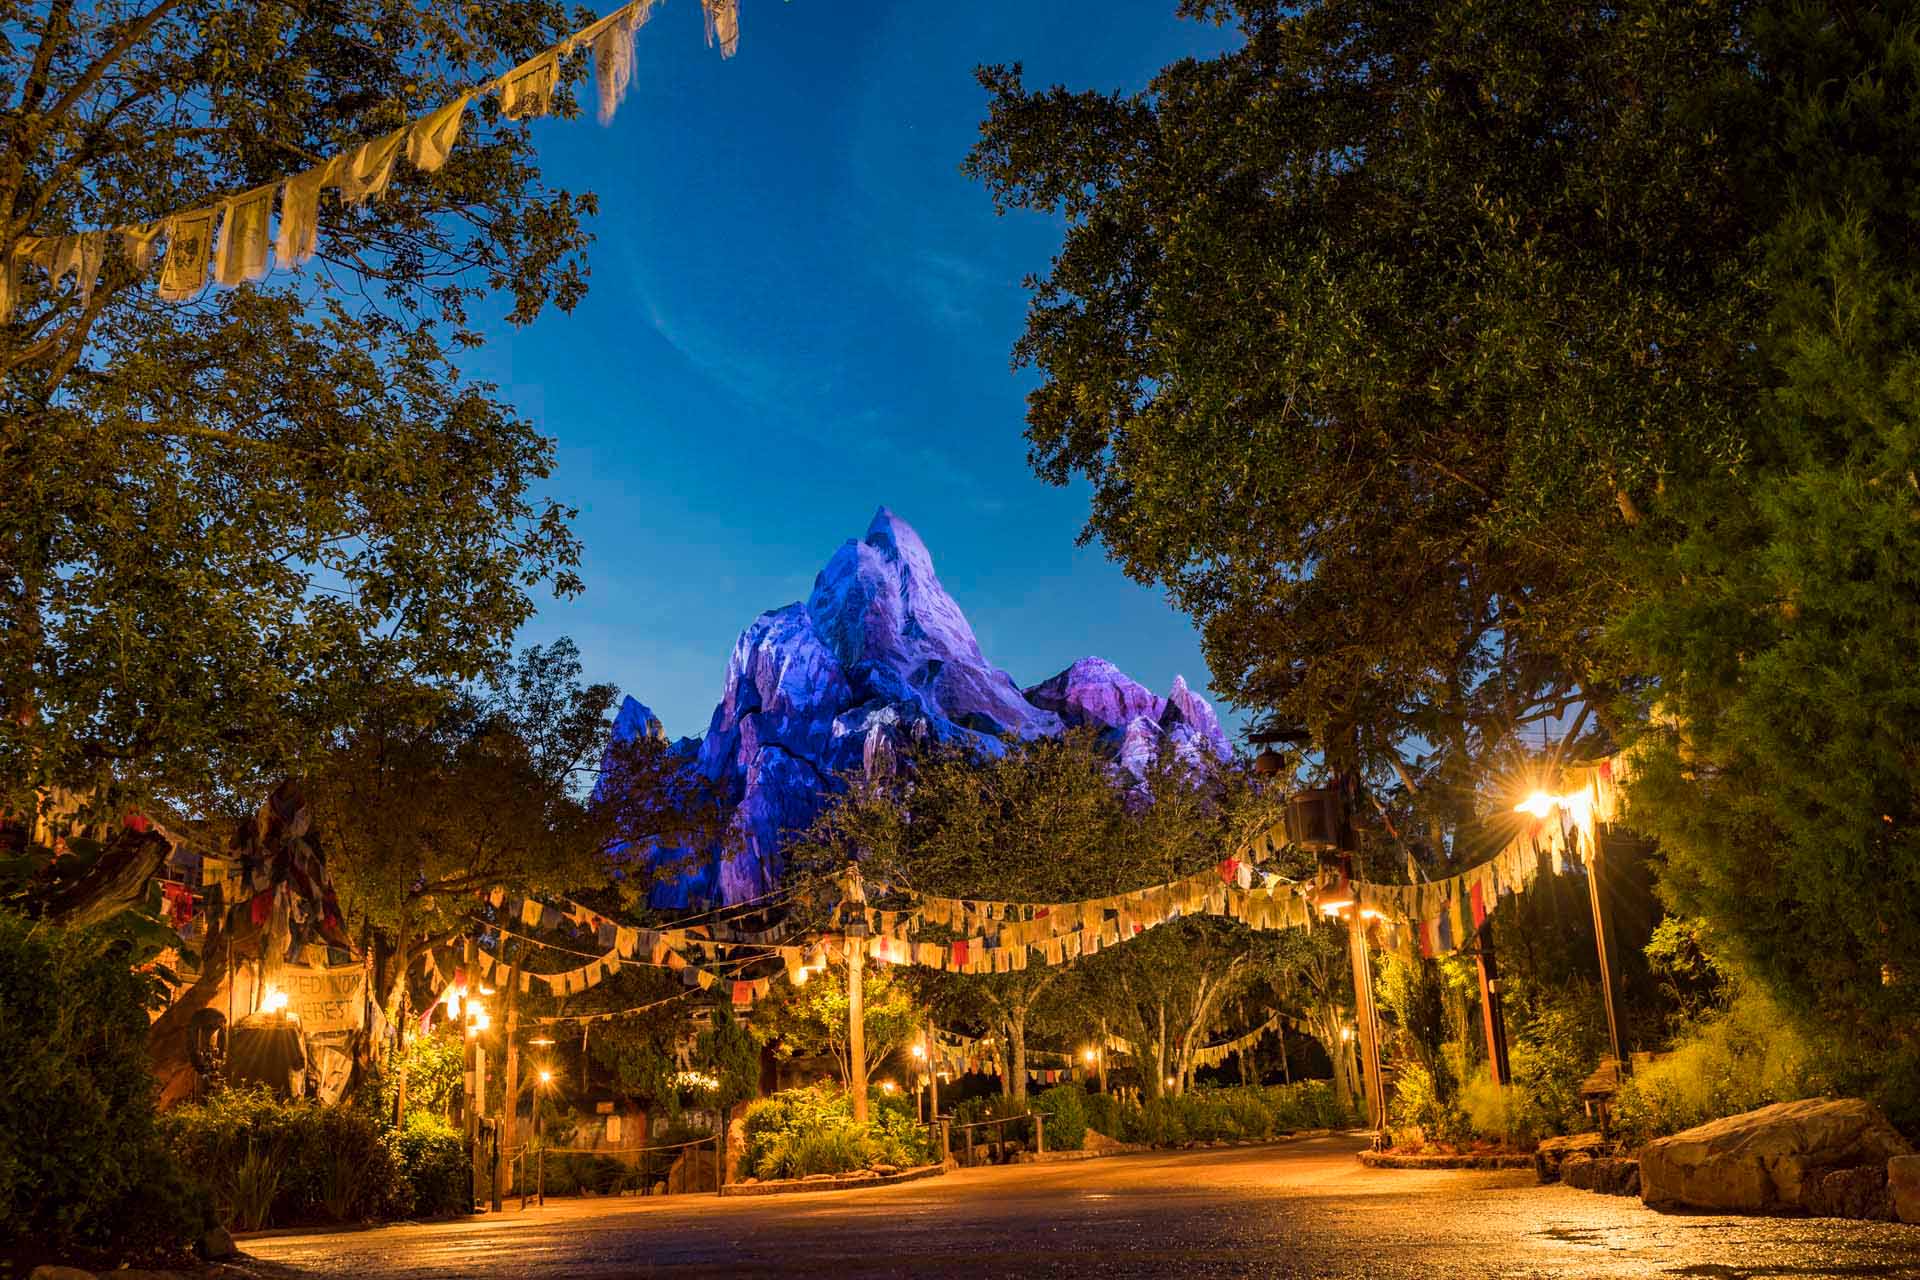 View of the Expedition Everest roller coaster at nighttime at Disney's Animal Kingdom